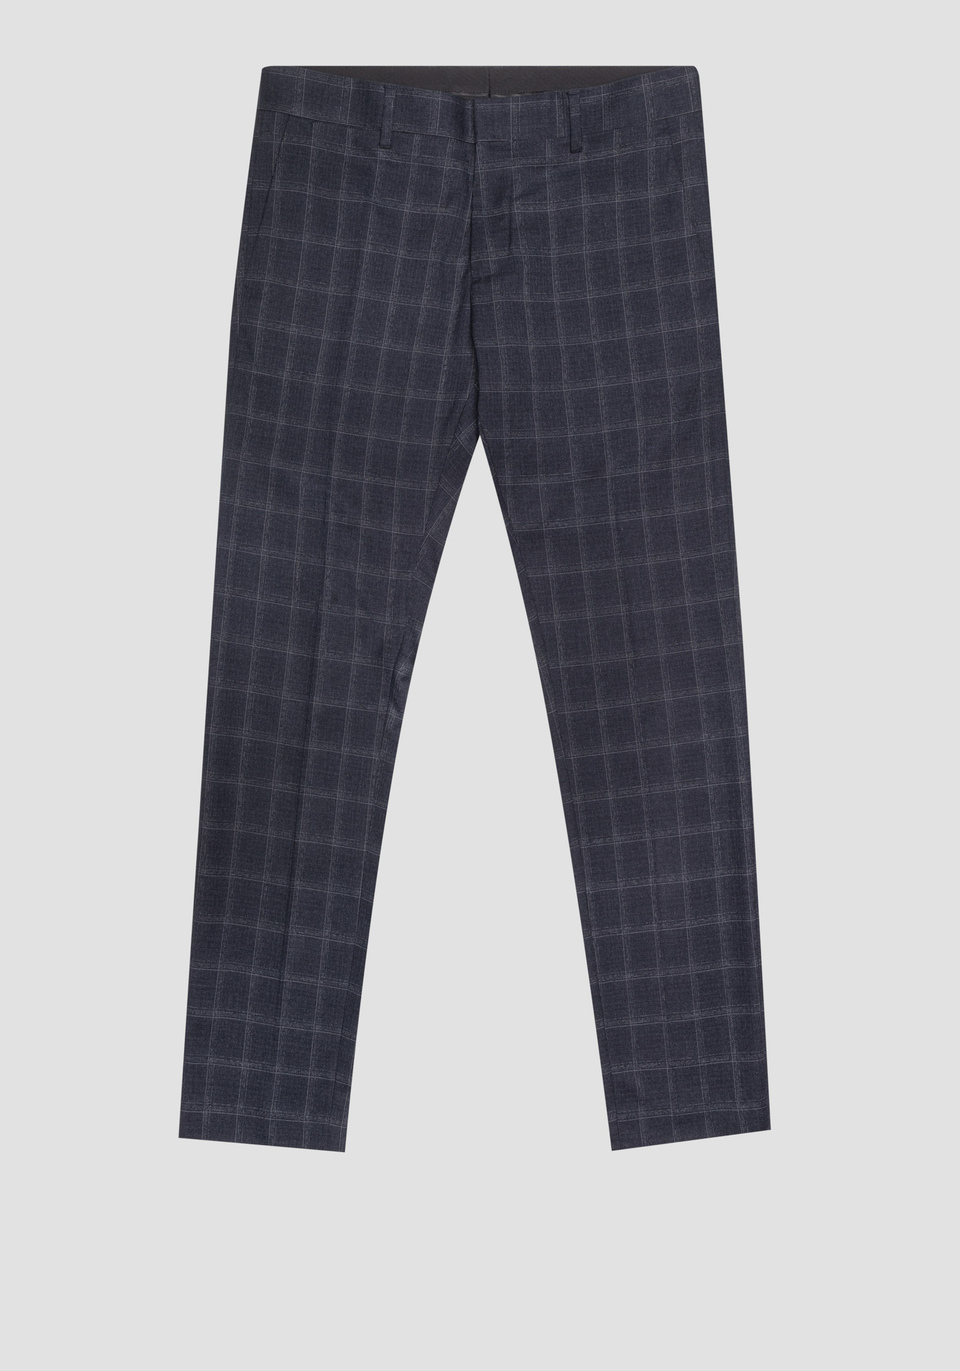 "BONNIE" SLIM FIT TROUSERS IN STRETCH VISCOSE BLEND FABRIC WITH CHECK PATTERN - Antony Morato Online Shop